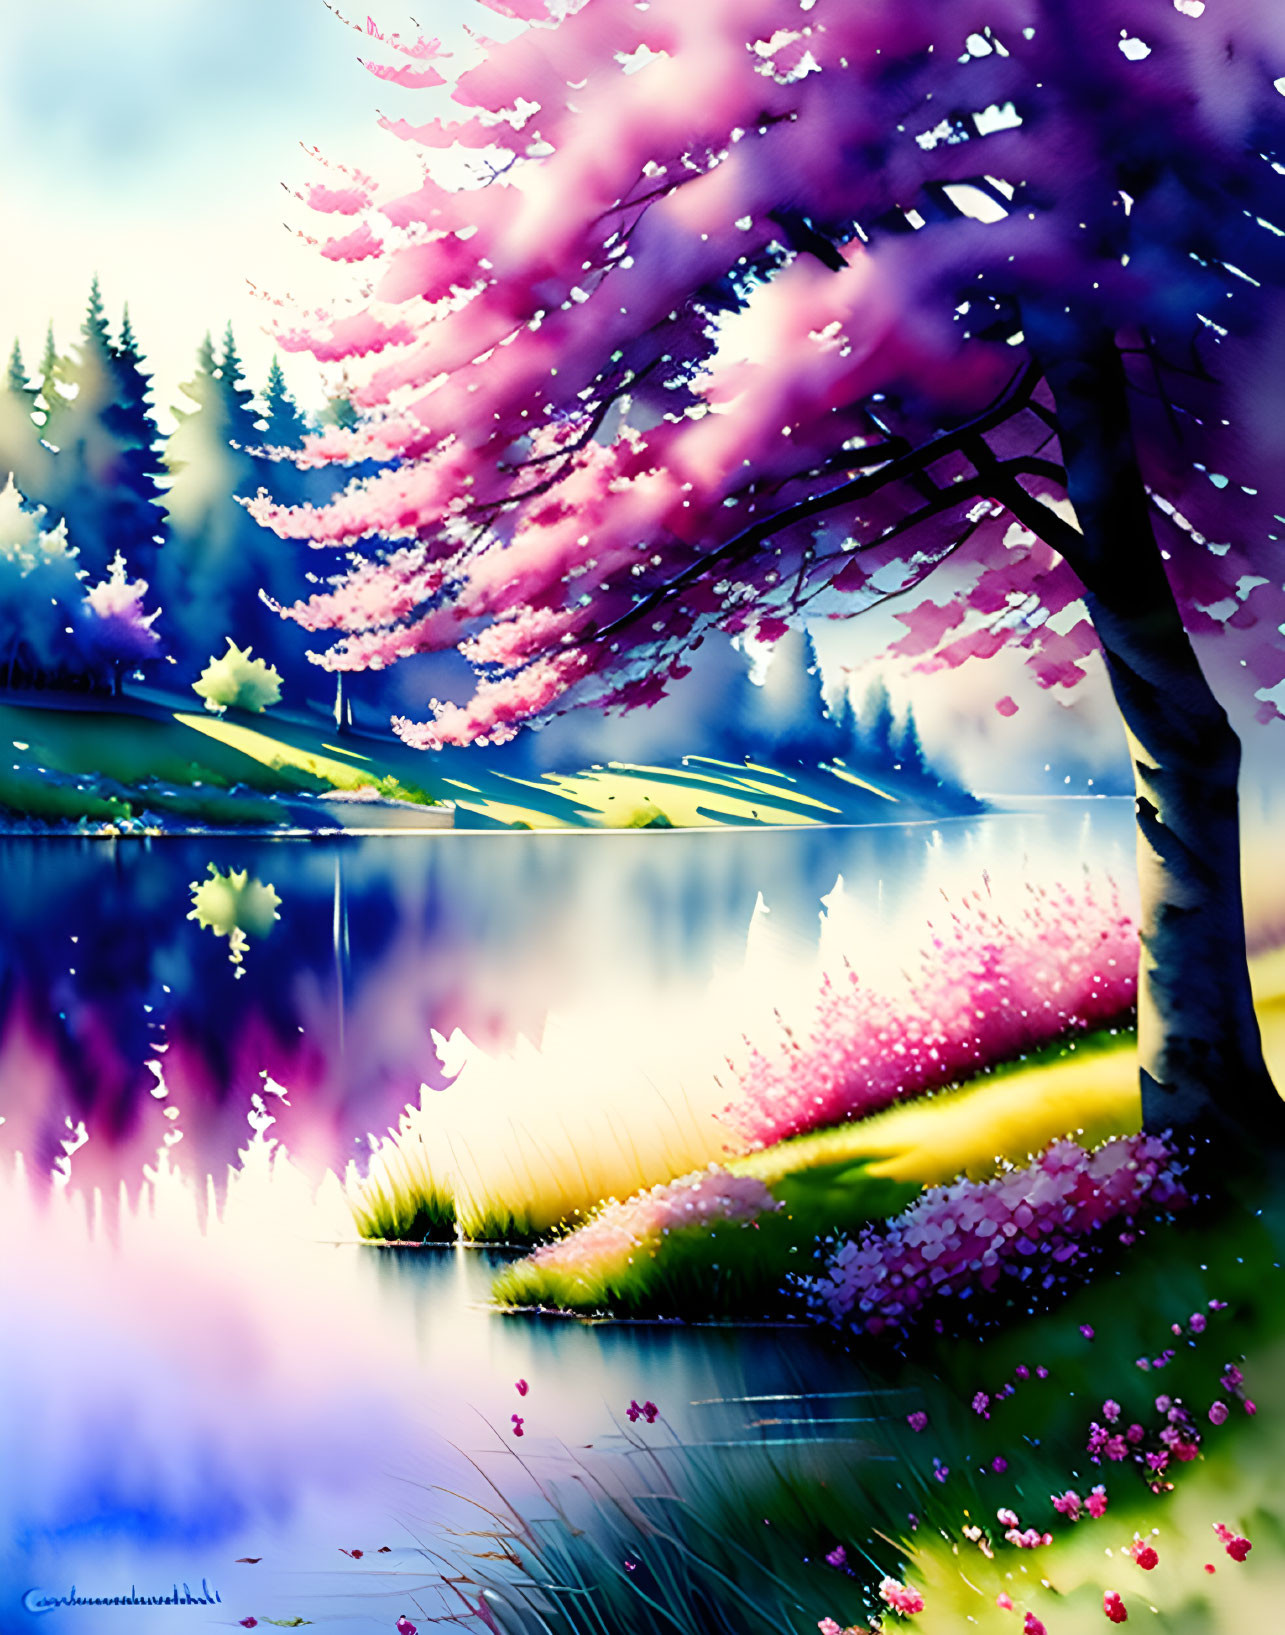 Scenic lakeside view with blossoming pink tree and lush greenery